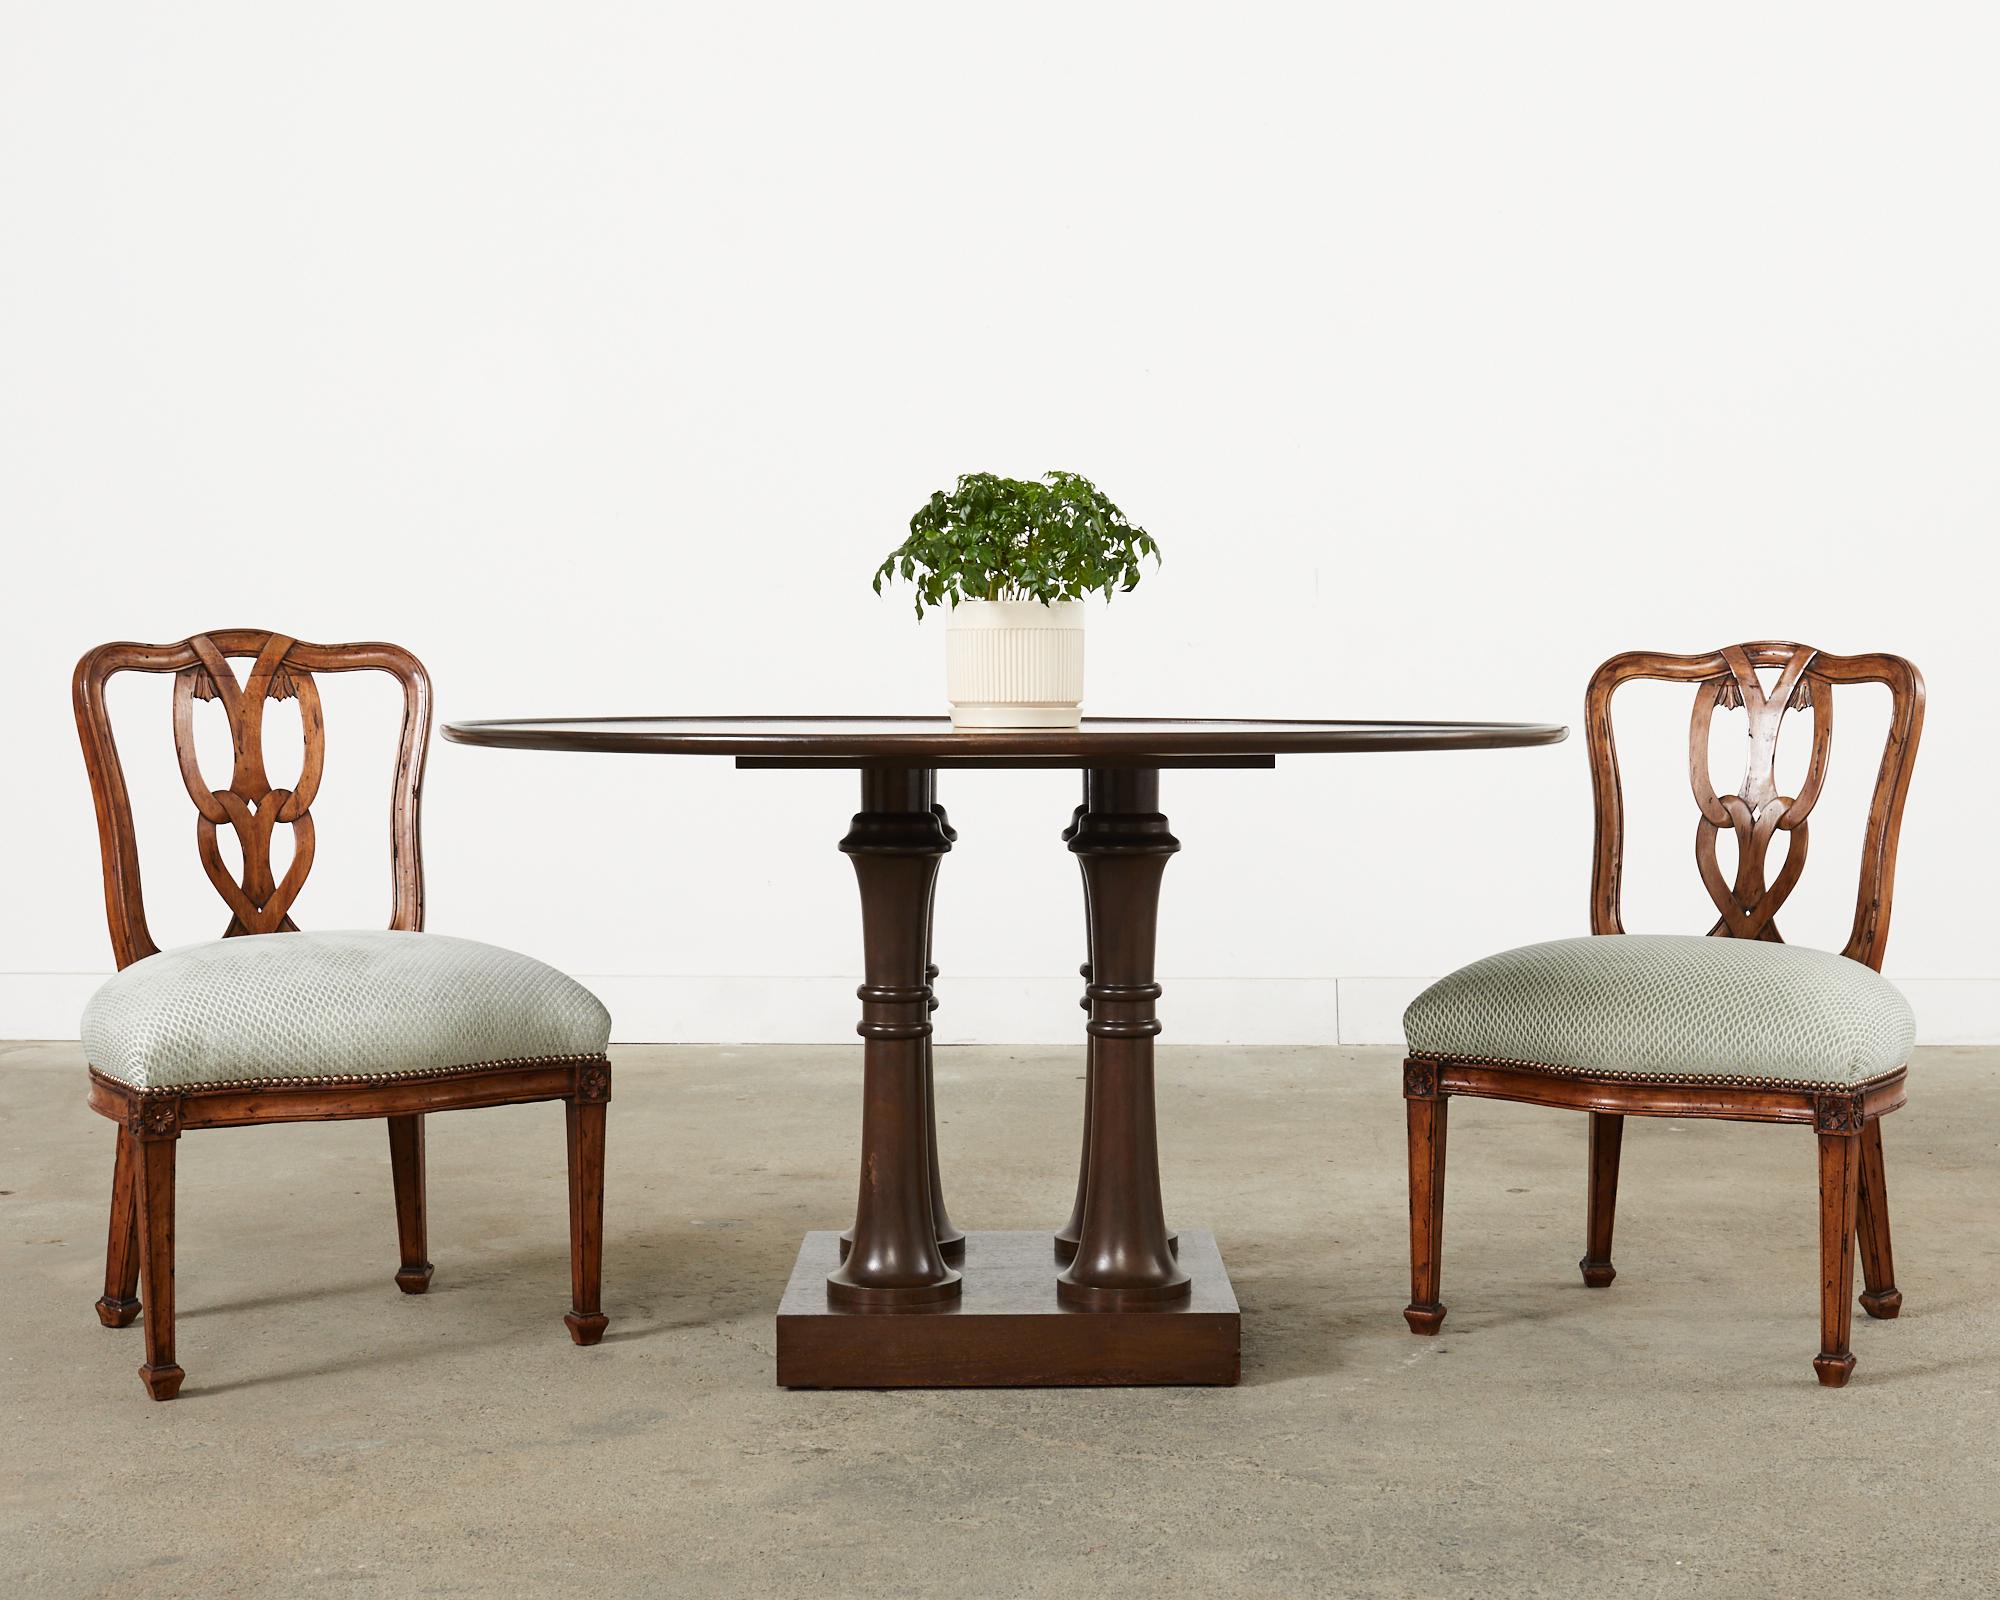 Distinctive set of six Italian dining chairs crafted in the Chippendale taste. The carved walnut frames feature a Venetian style ribbon back. The matching chairs are upholstered with two different, but complementary geometric fabrics having